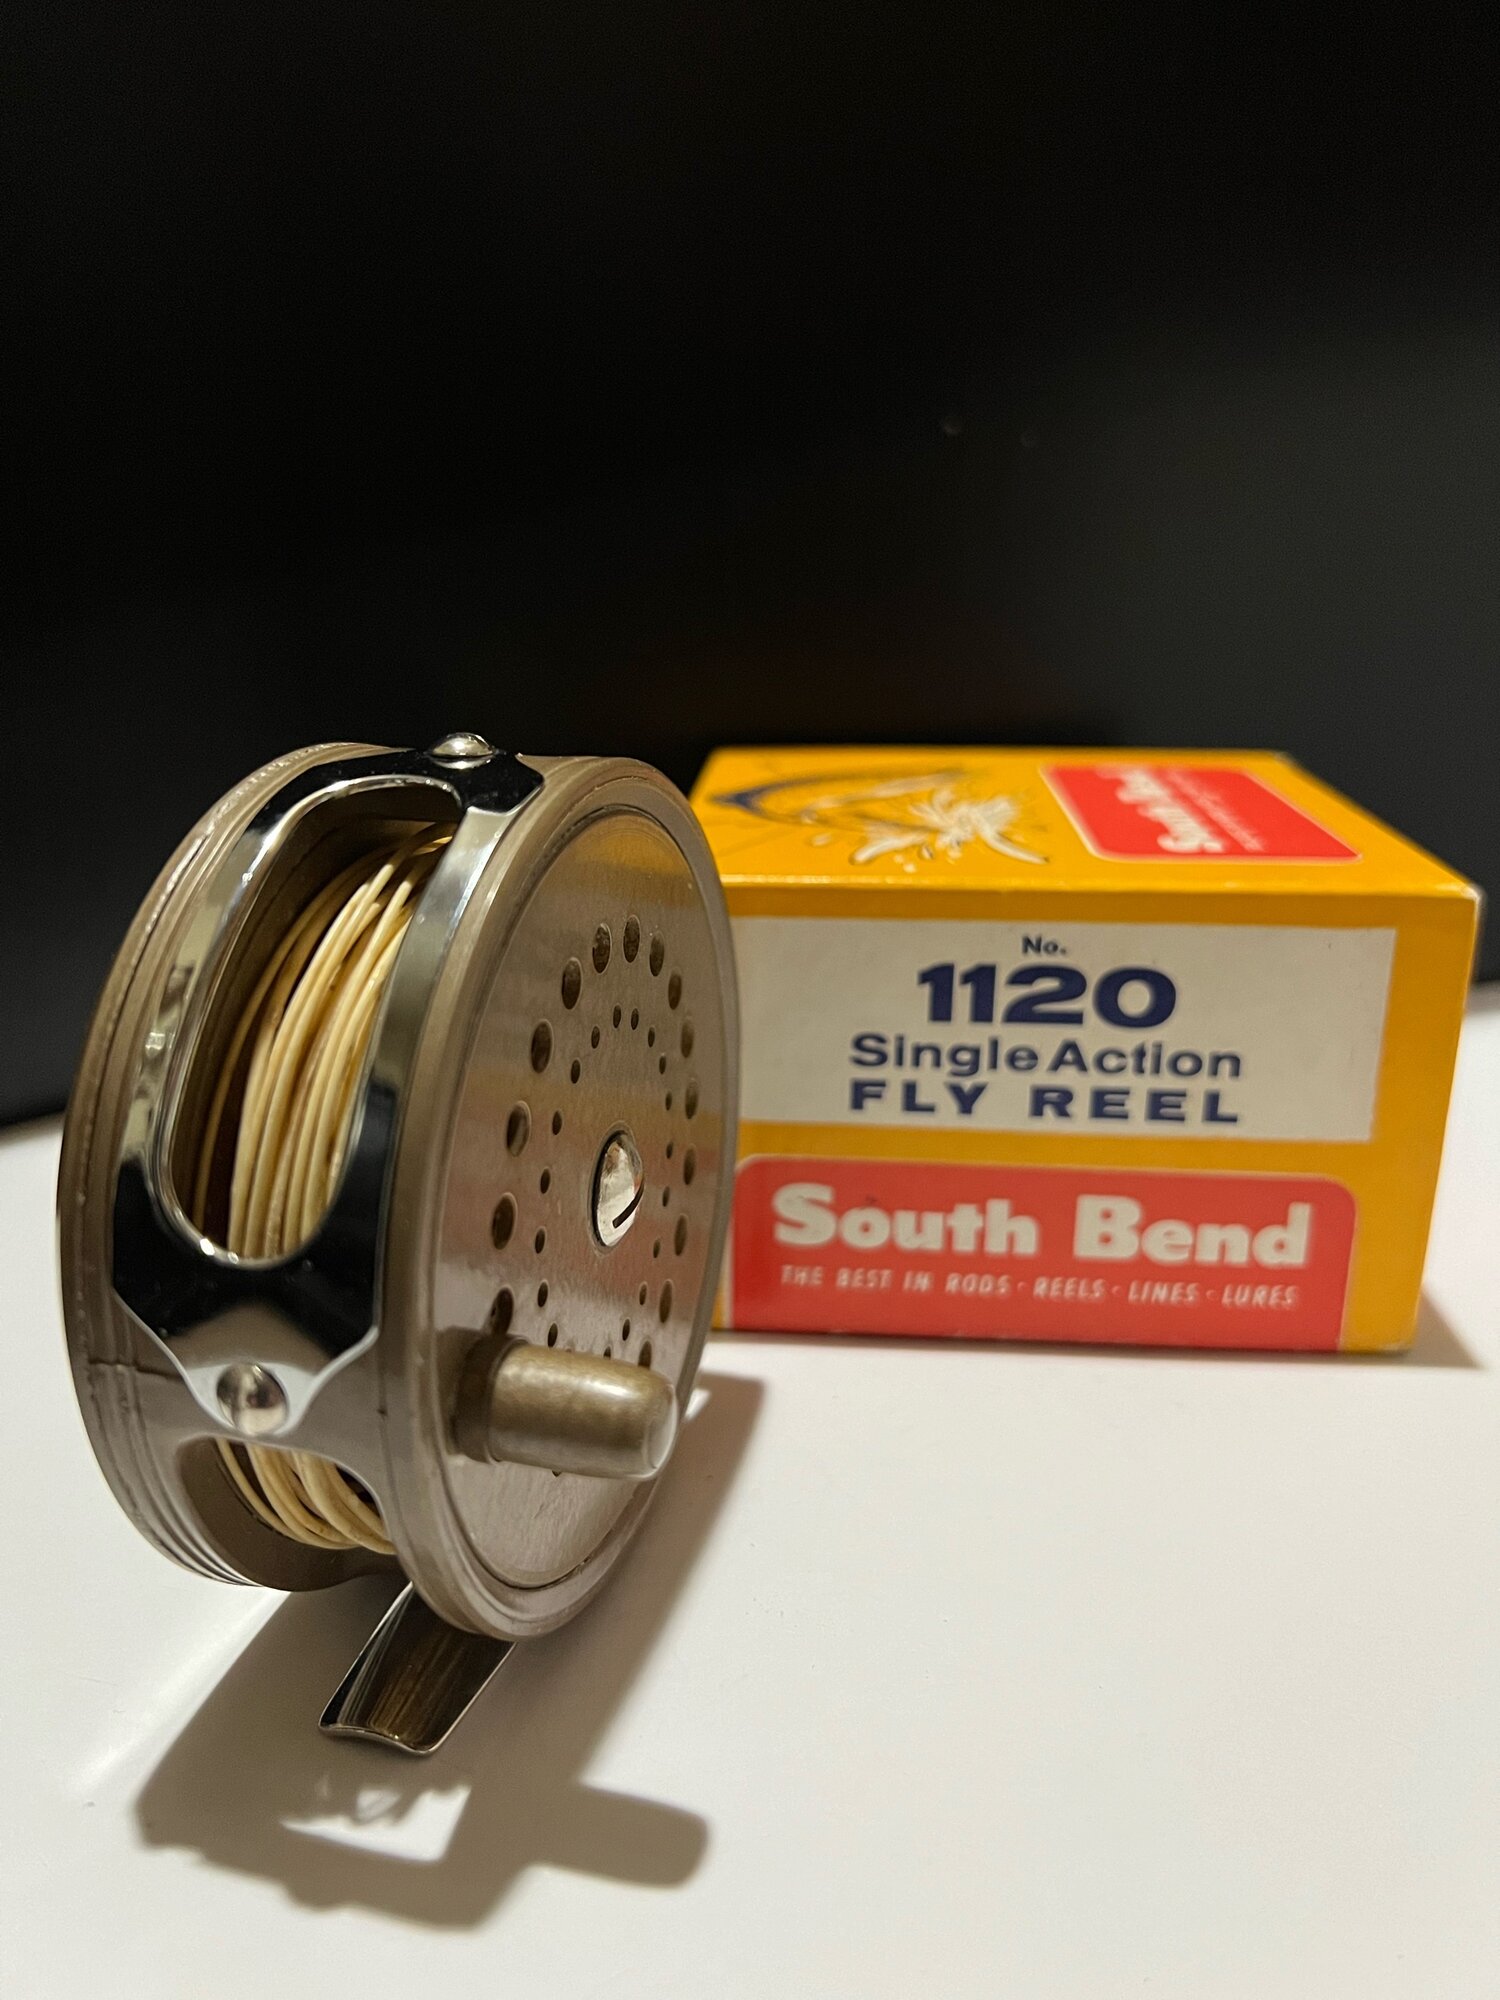 South Bend 1120 Single Action Fly Reel Reversible with Original